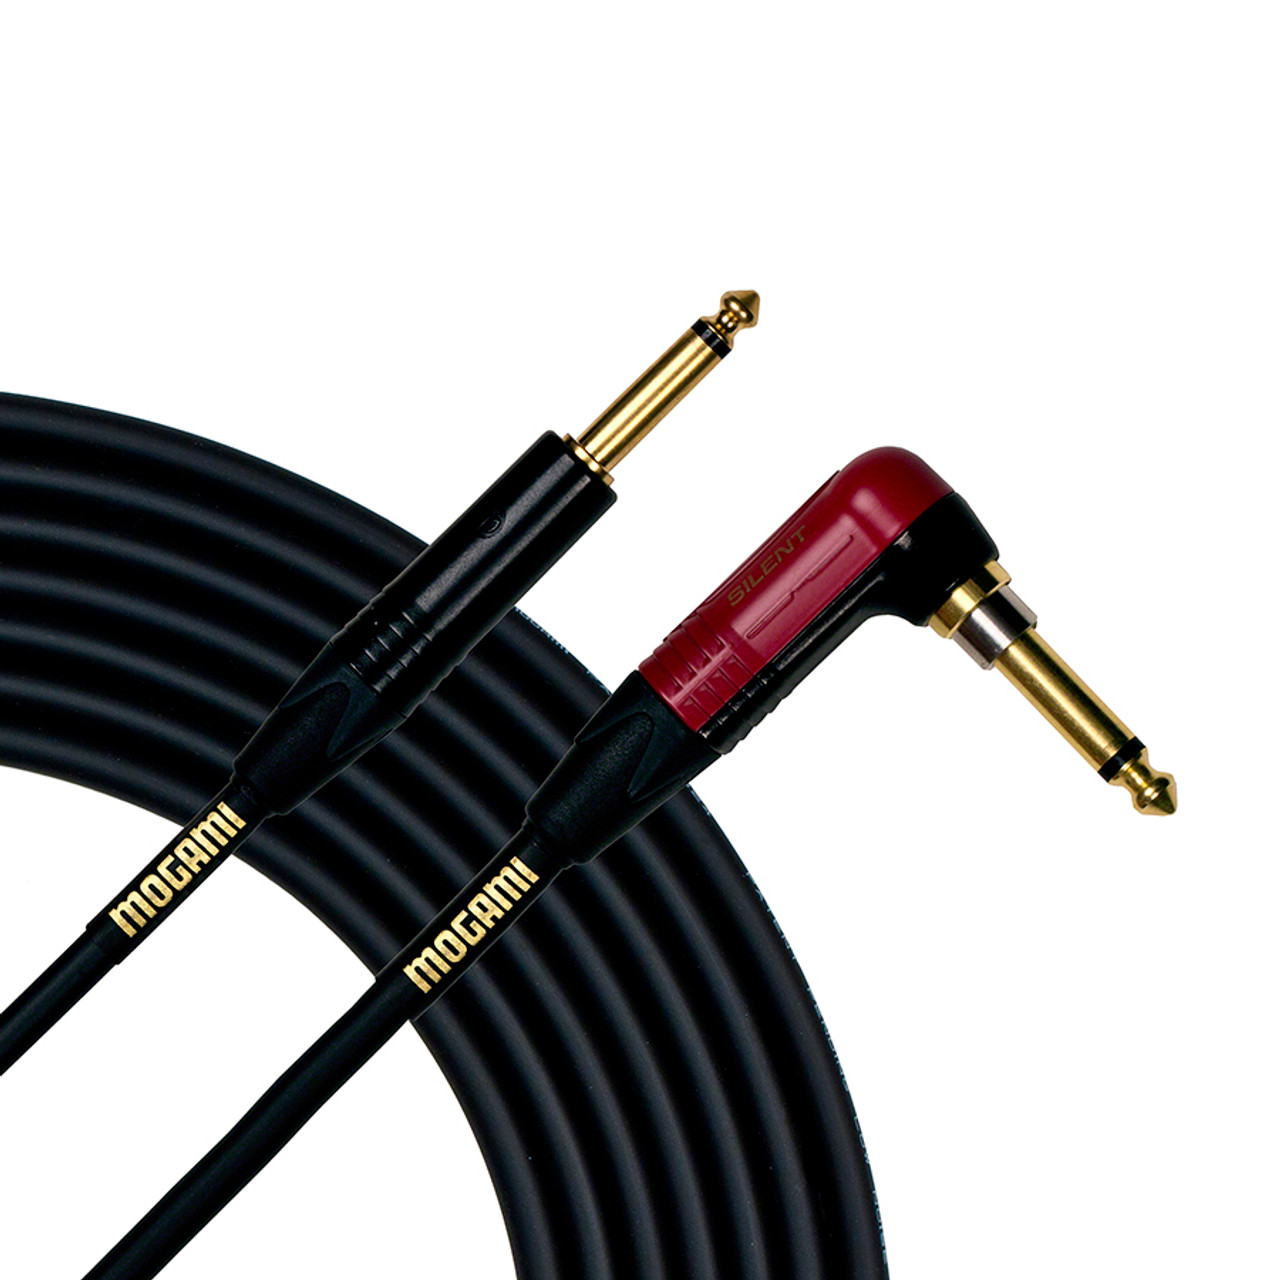 Mogami Gold Instrument Silent R-25 25 Foot Guitar Cable with Right Angle Plug